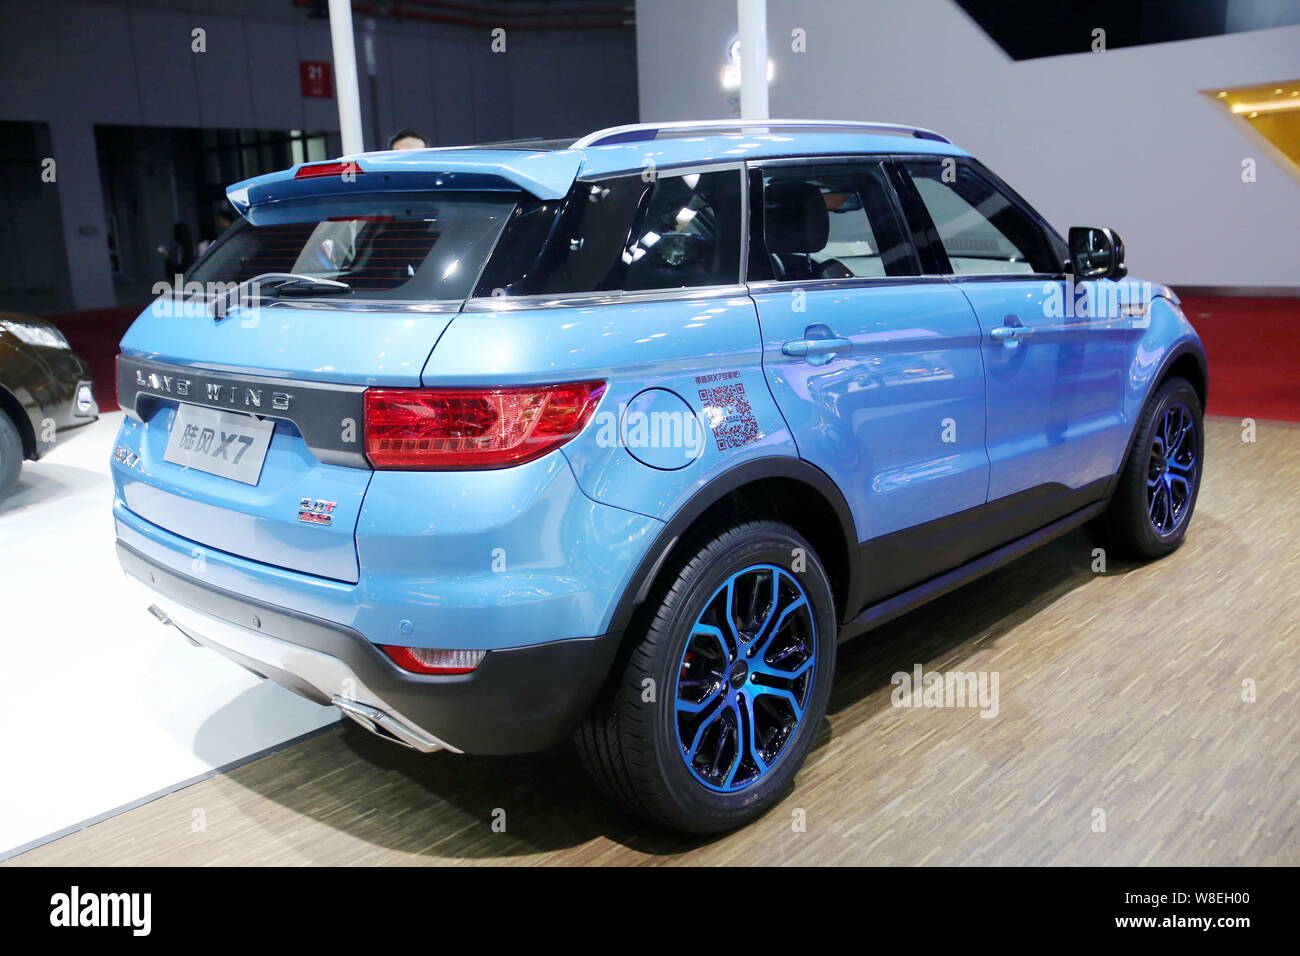 --FILE--A Landwind X7 SUV of JMC (Jiangling Motor Co.), which resembles the Range Rover Evoque of Jaguar Land Rover, is on display during the 16th Sha Stock Photo